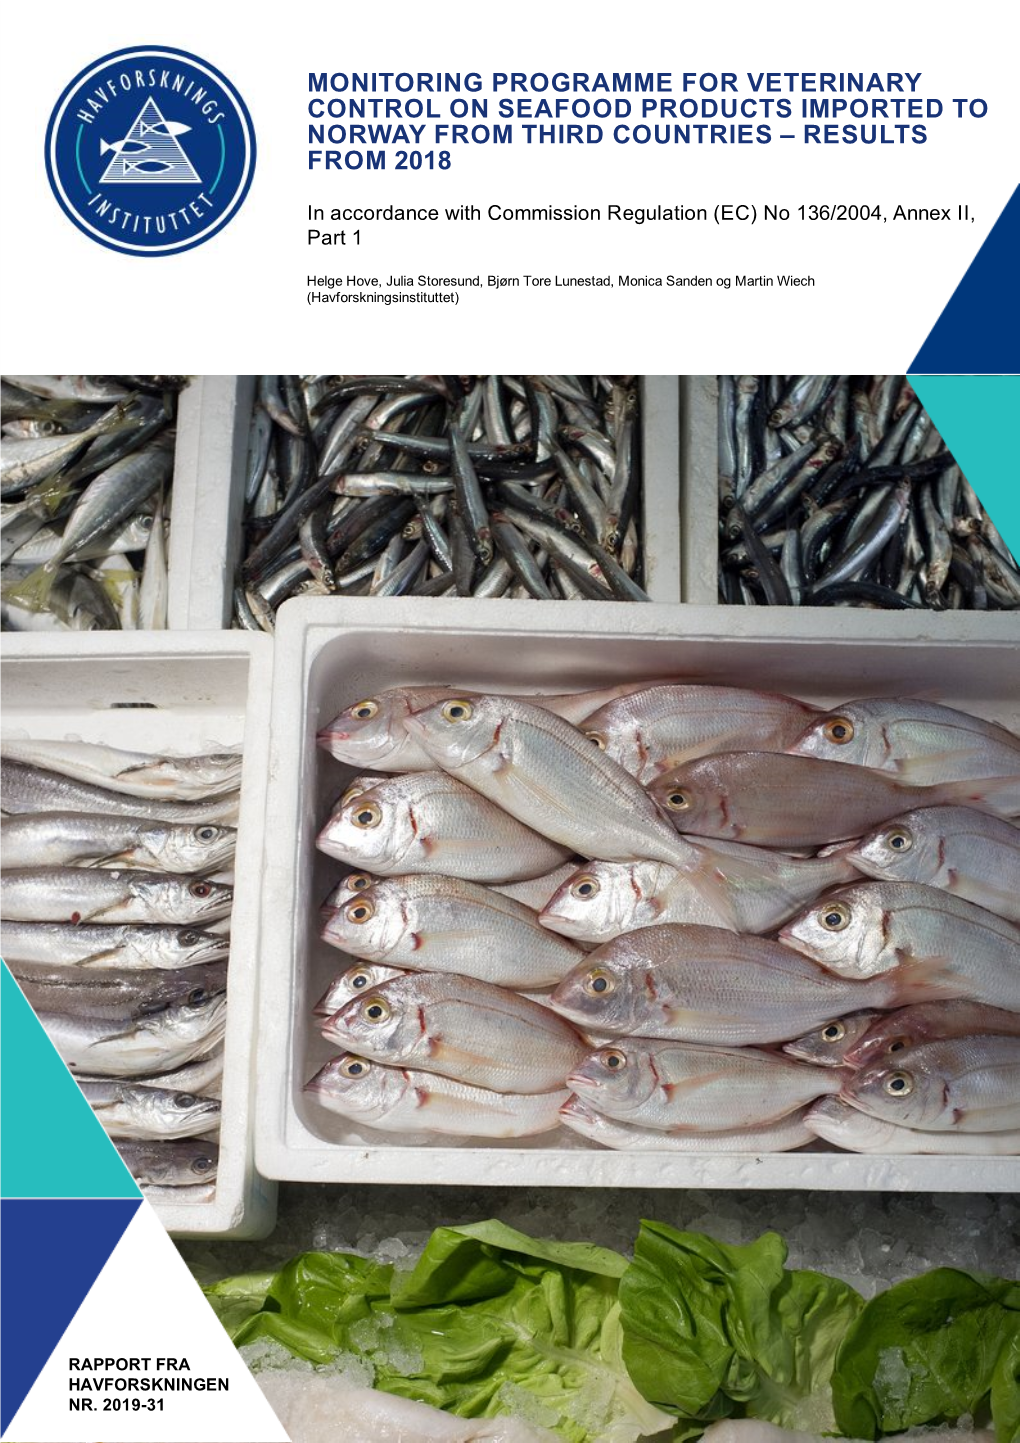 Monitoring Programme for Veterinary Control on Seafood Products Imported to Norway from Third Countries – Results from 2018